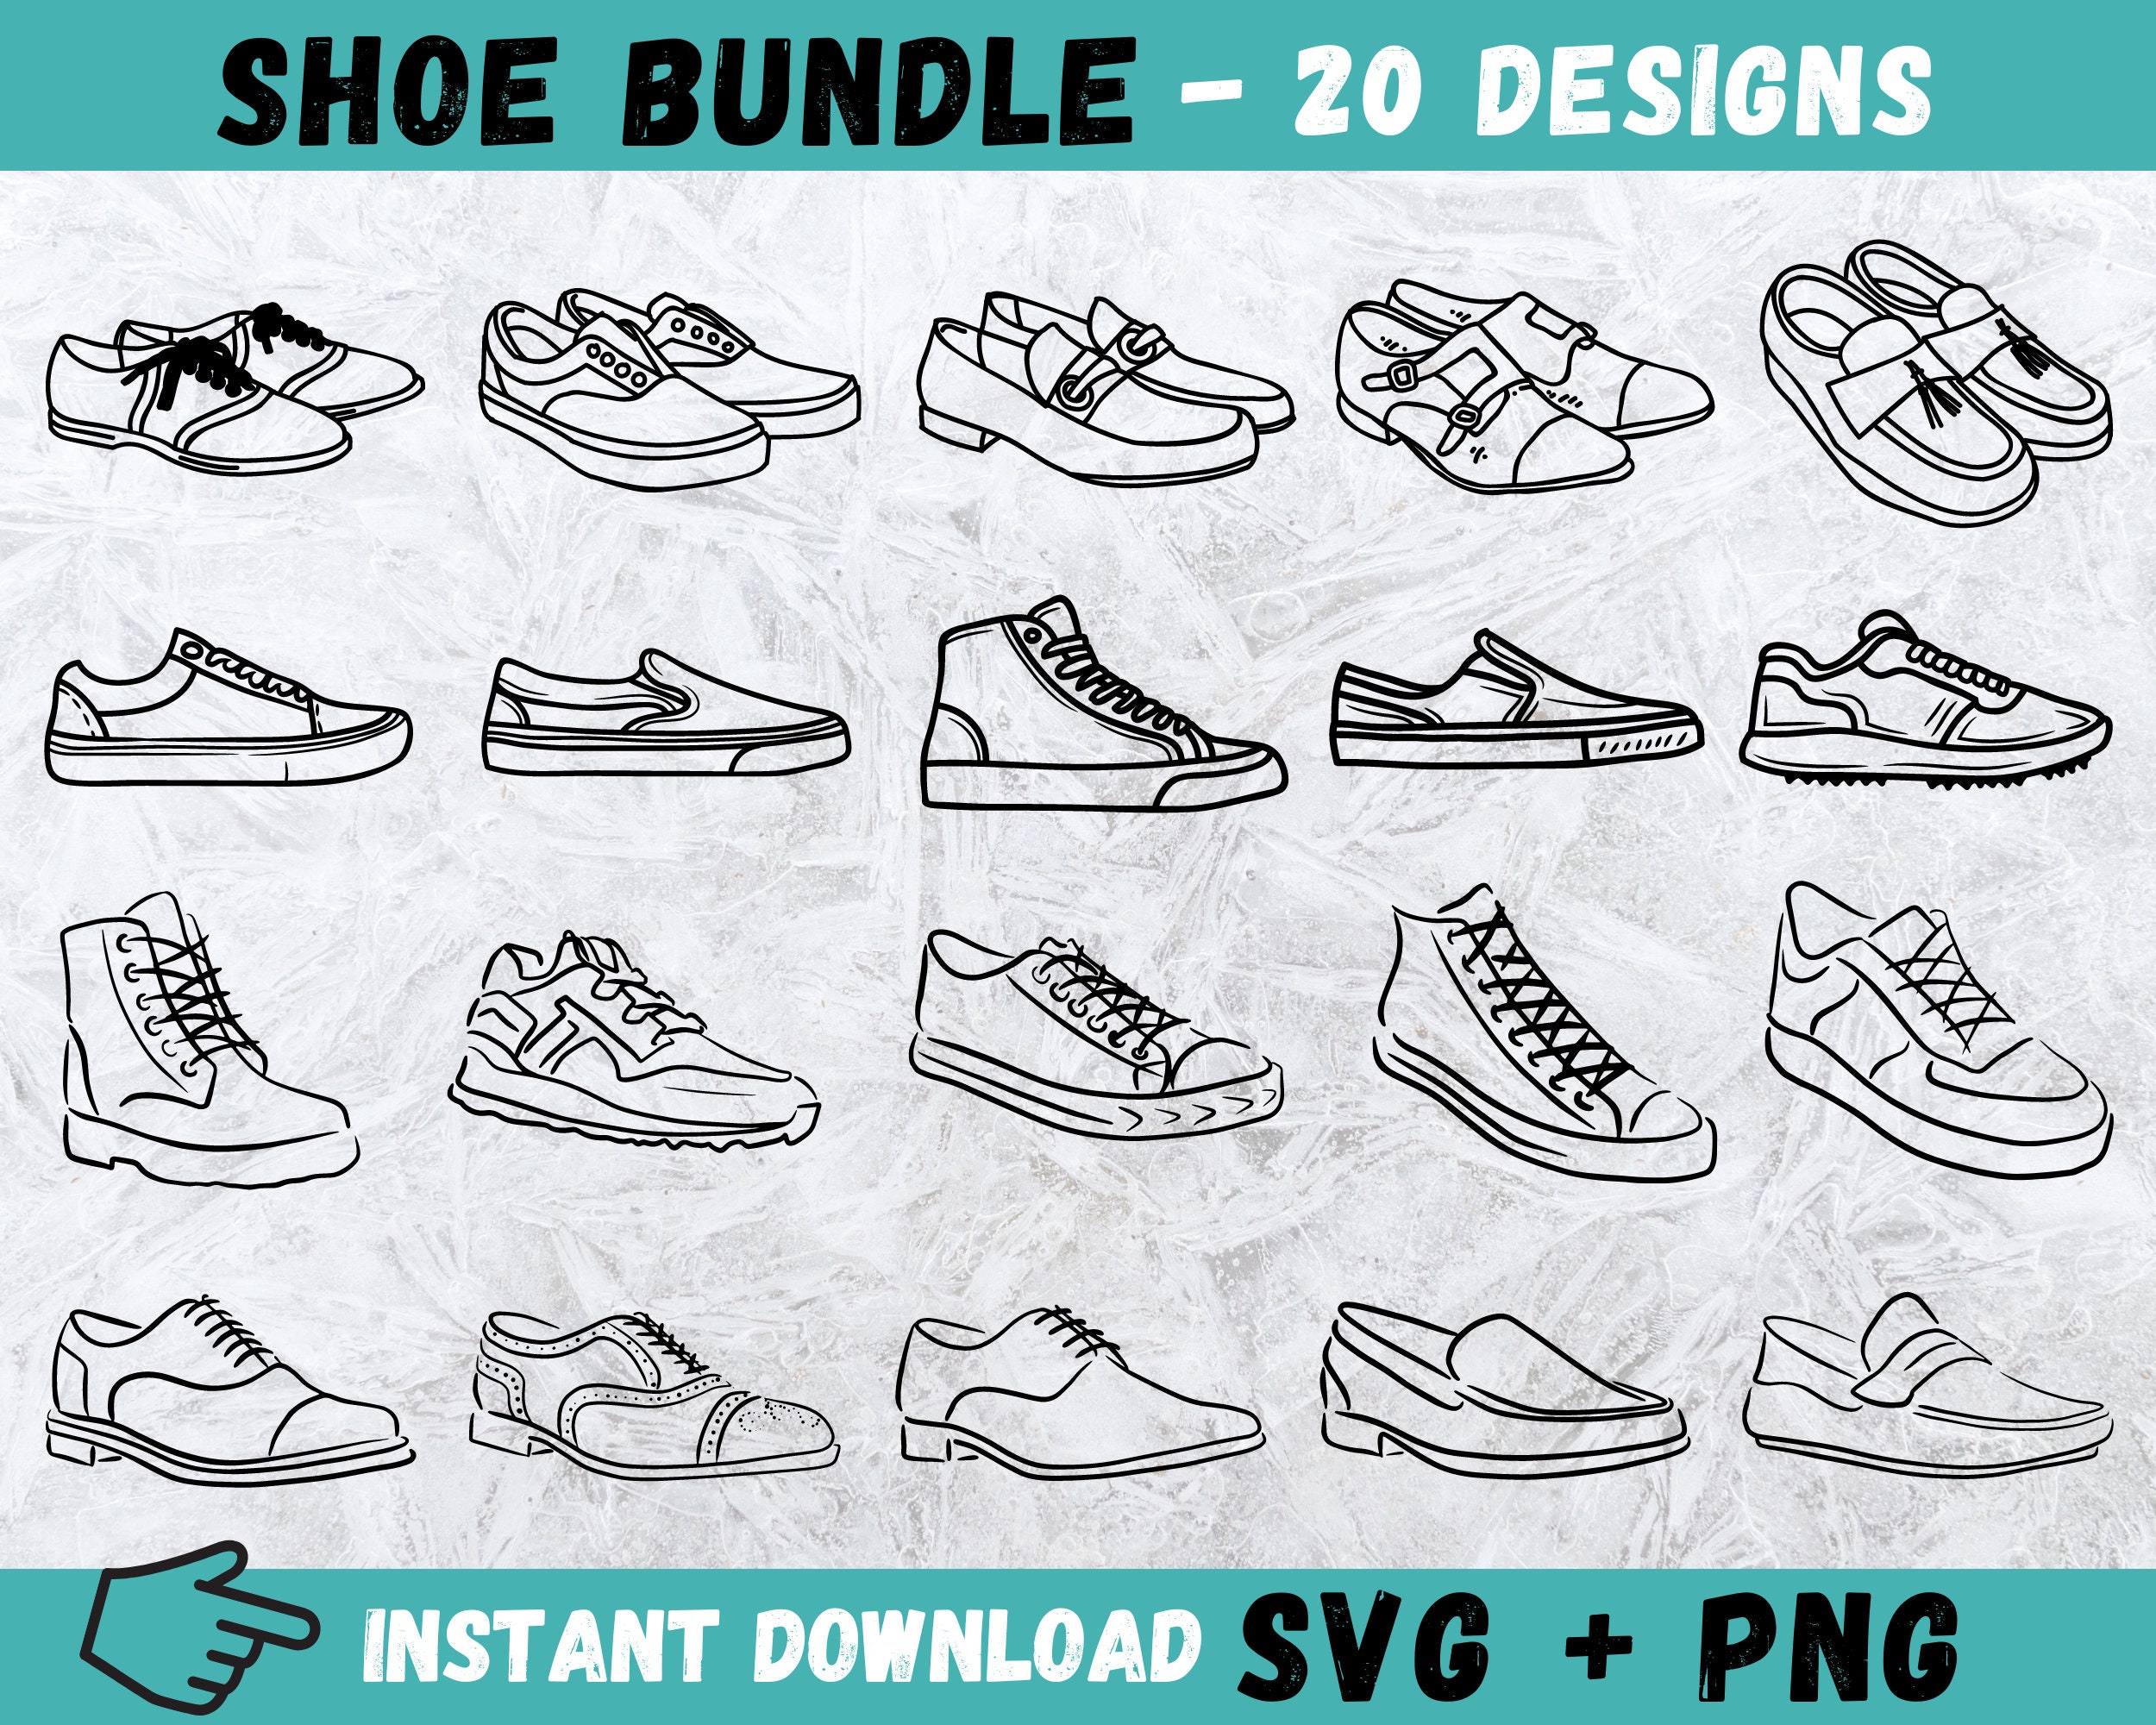 Vintage sneakers shoes silhouette Royalty Free Vector Image